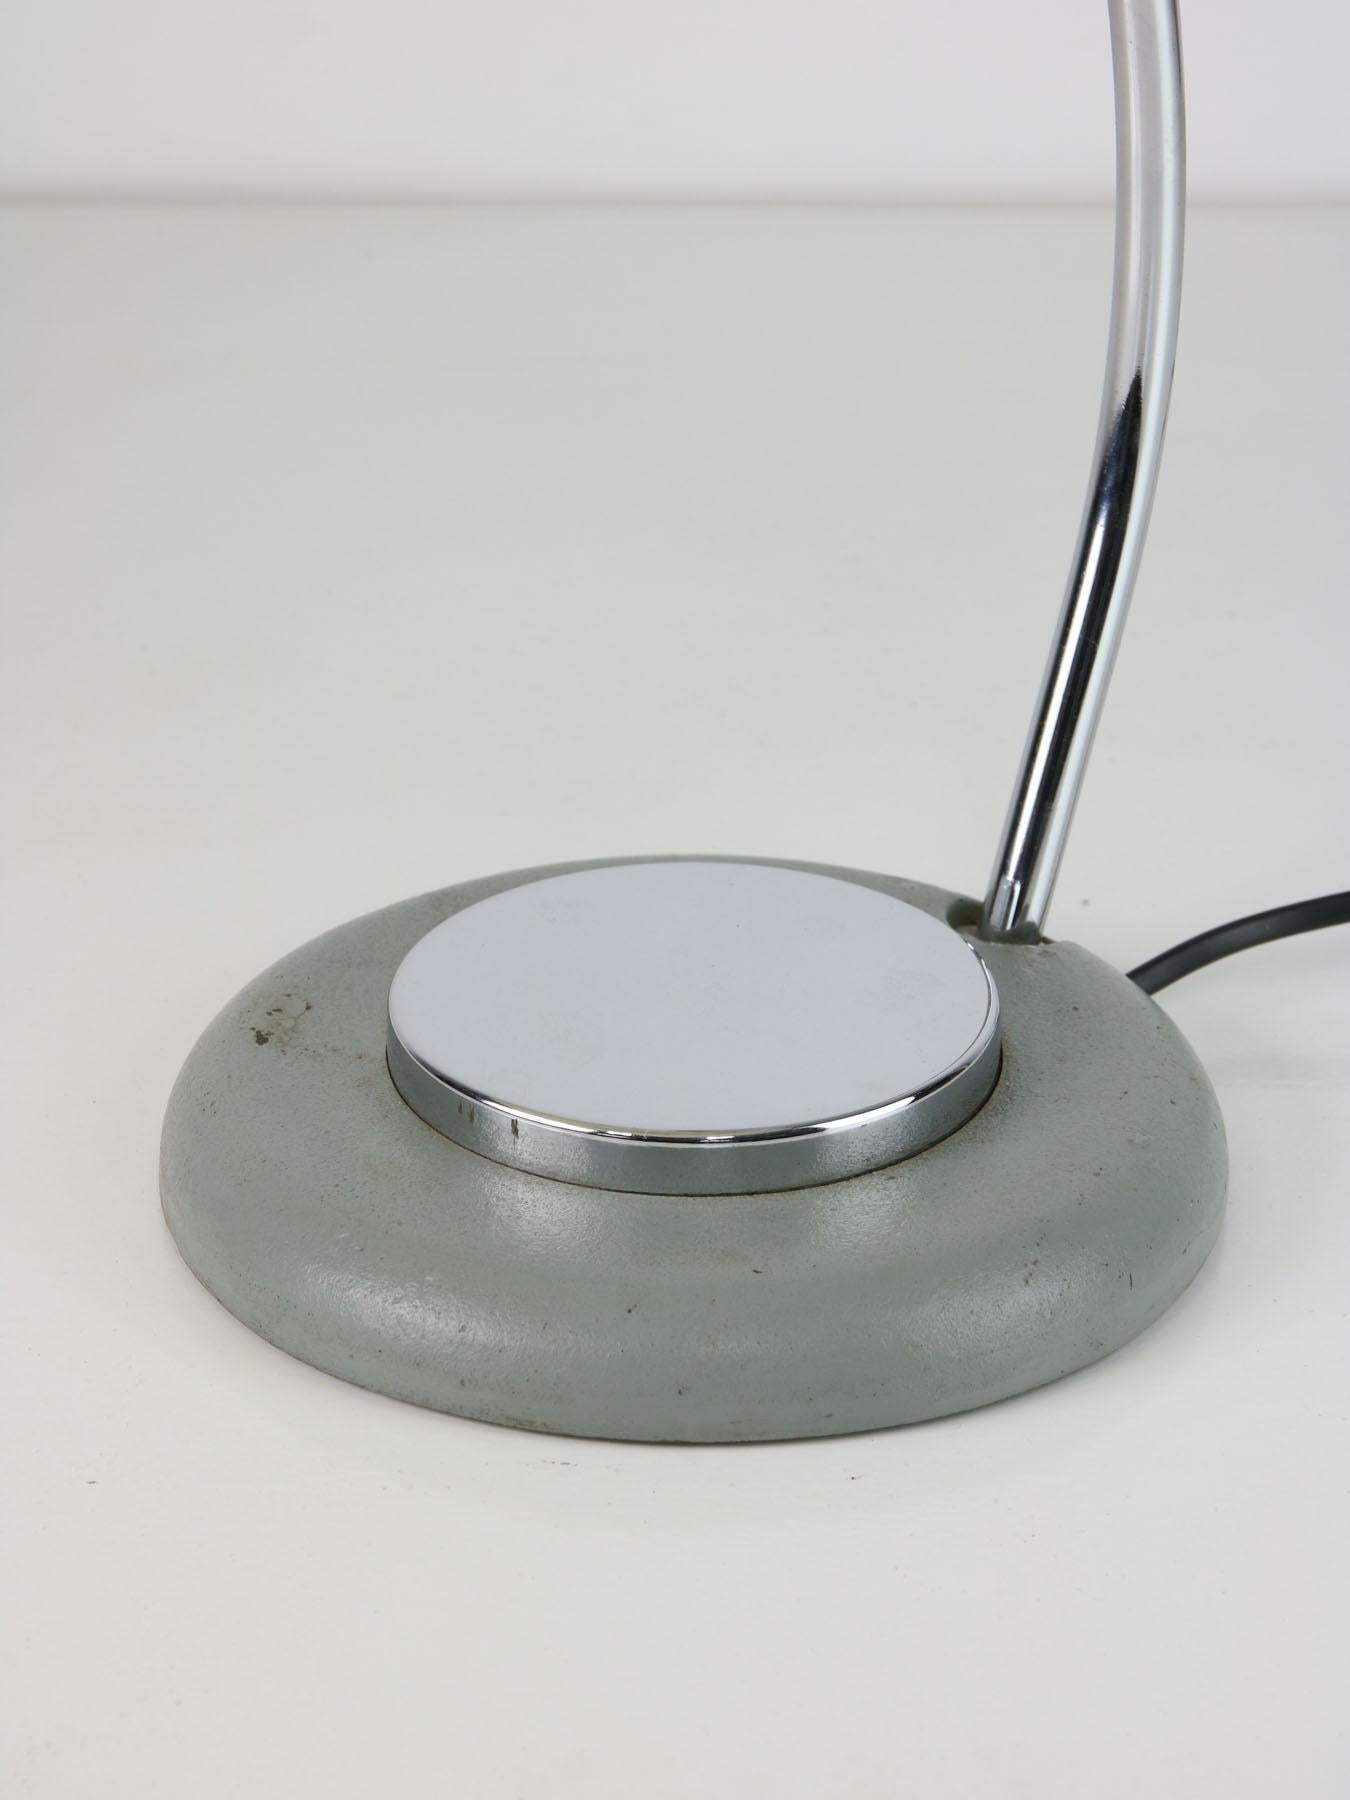 Bauhaus Saucer Table Lamp with Big Button For Sale 1